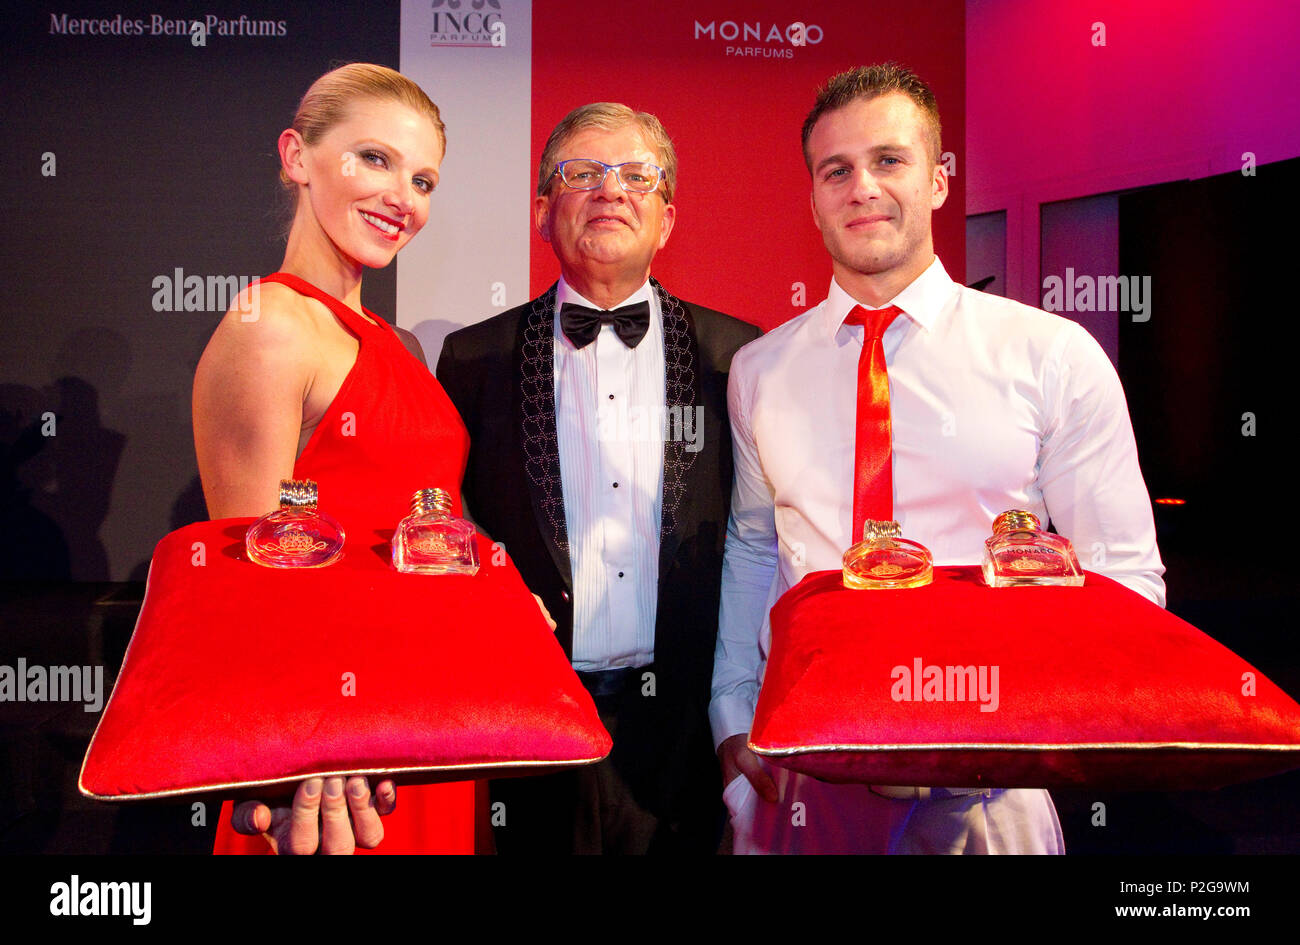 Cannes, France. 19th Oct, 2015. Cannes, France - October 19, 2015: TFWA Tax Free World Exhibition at the Palais des Festivals in Cannes with Remy Deslandes (middle), CEO of INCC Group Monaco Parfums and Mercedes Parfums present their new Brand, Parfum, Parfuem, Fragrance, Duft, | usage worldwide Credit: dpa/Alamy Live News Stock Photo